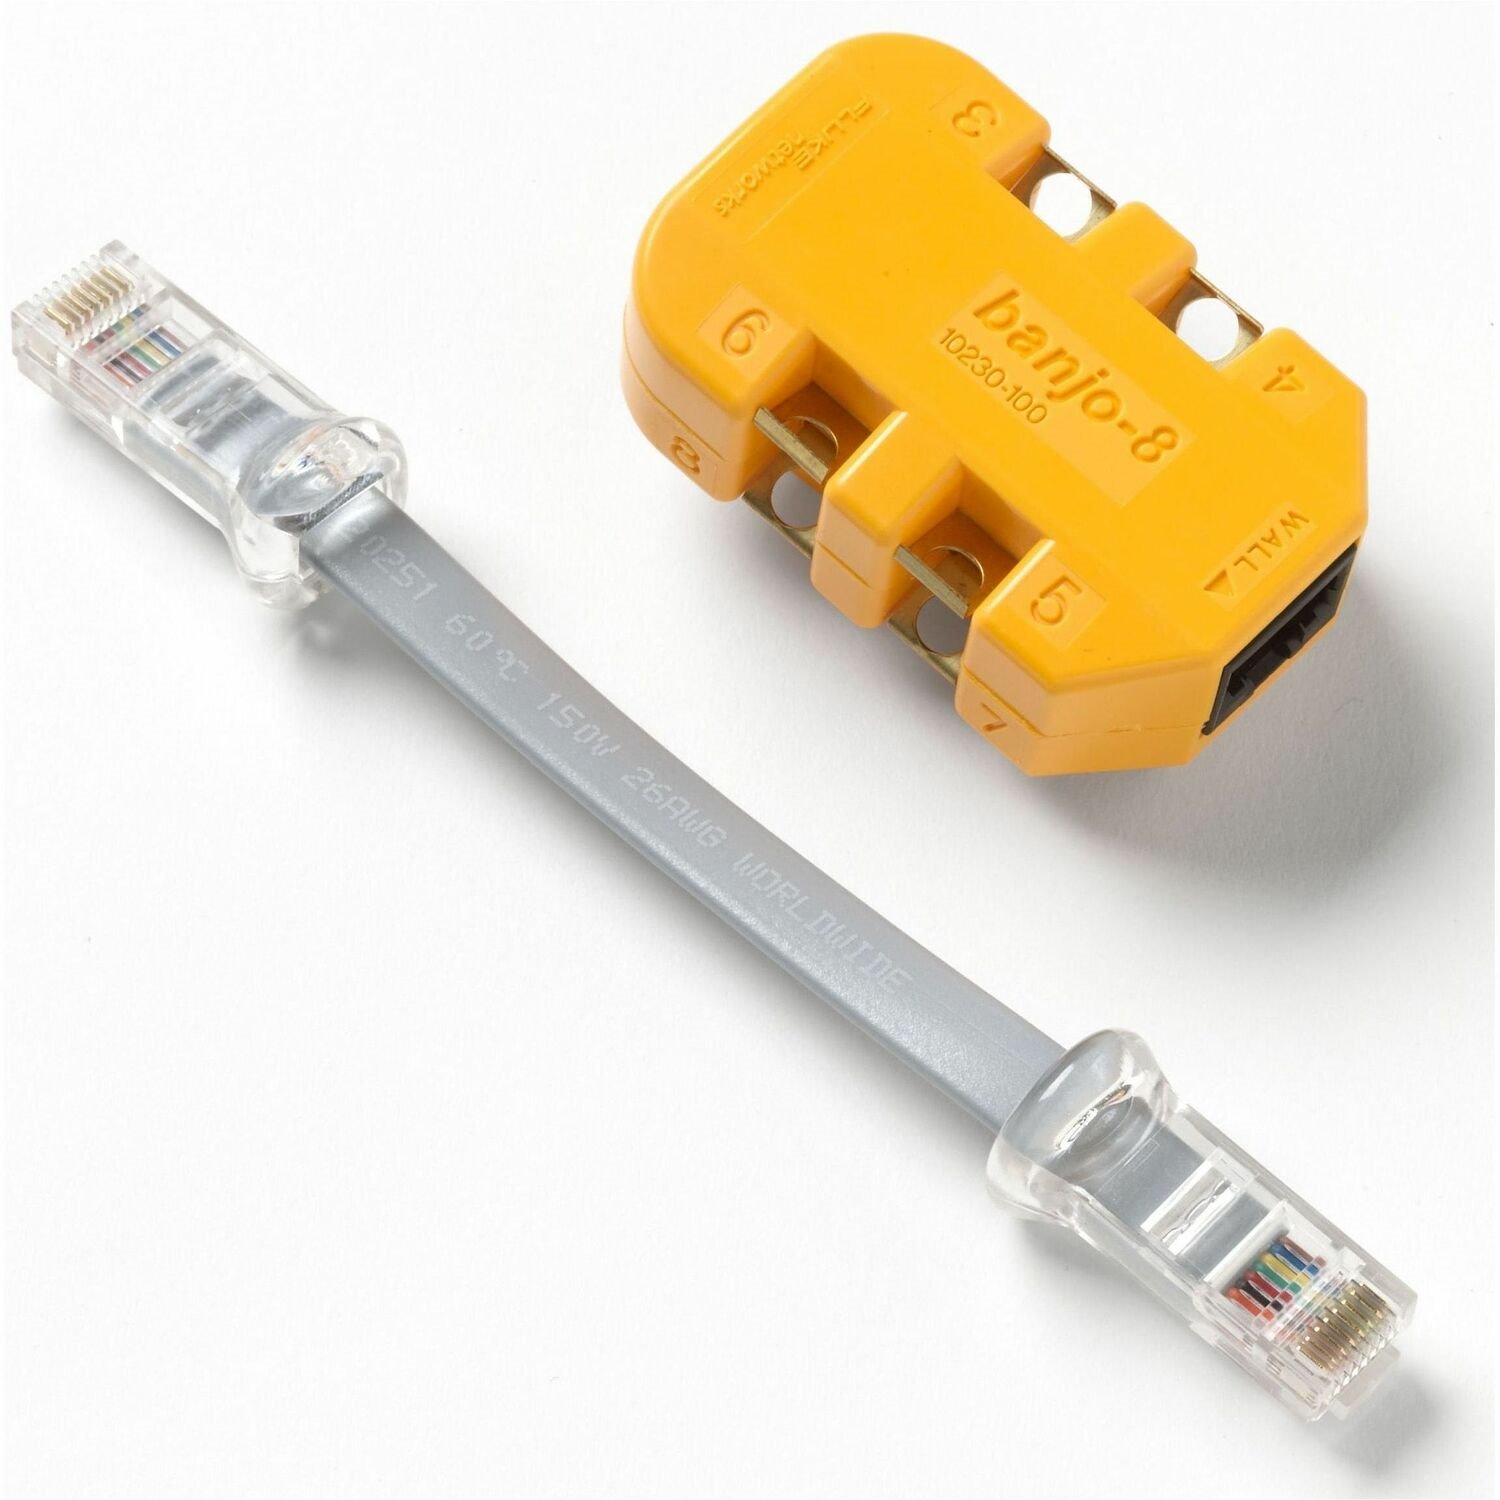 Fluke Networks 8-wire In-line Modular Adapter with K-Plug